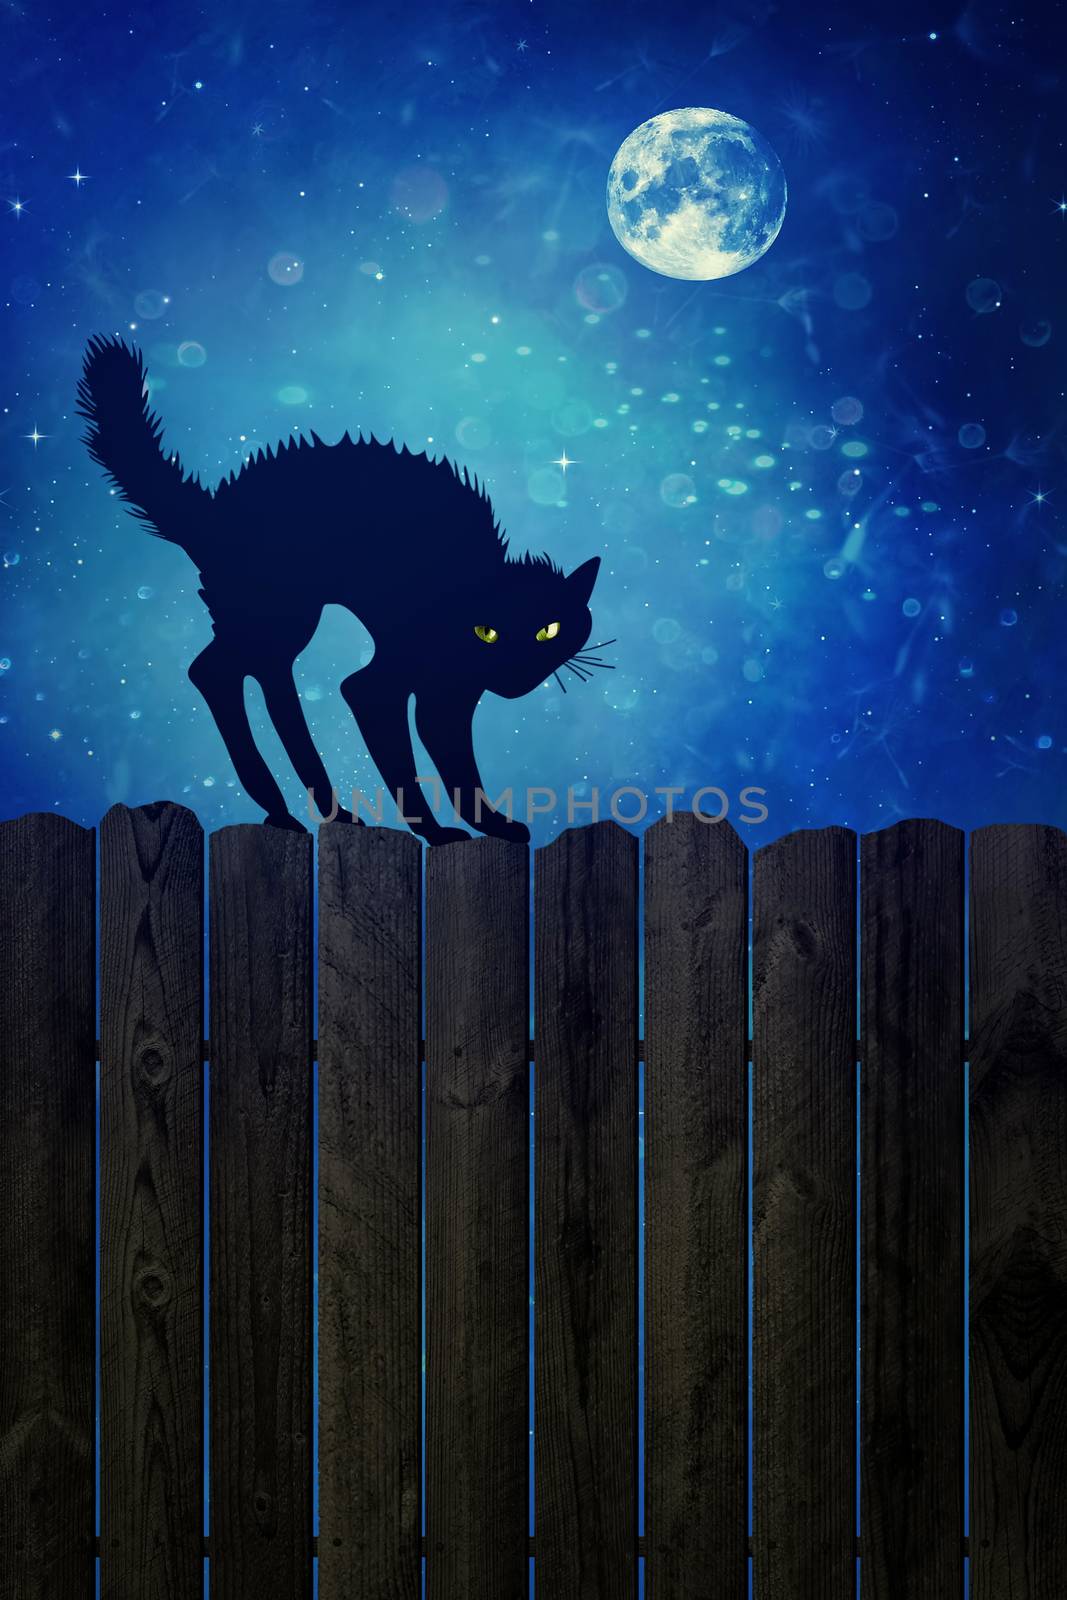 Black cat on wood fence at  night by Sandralise